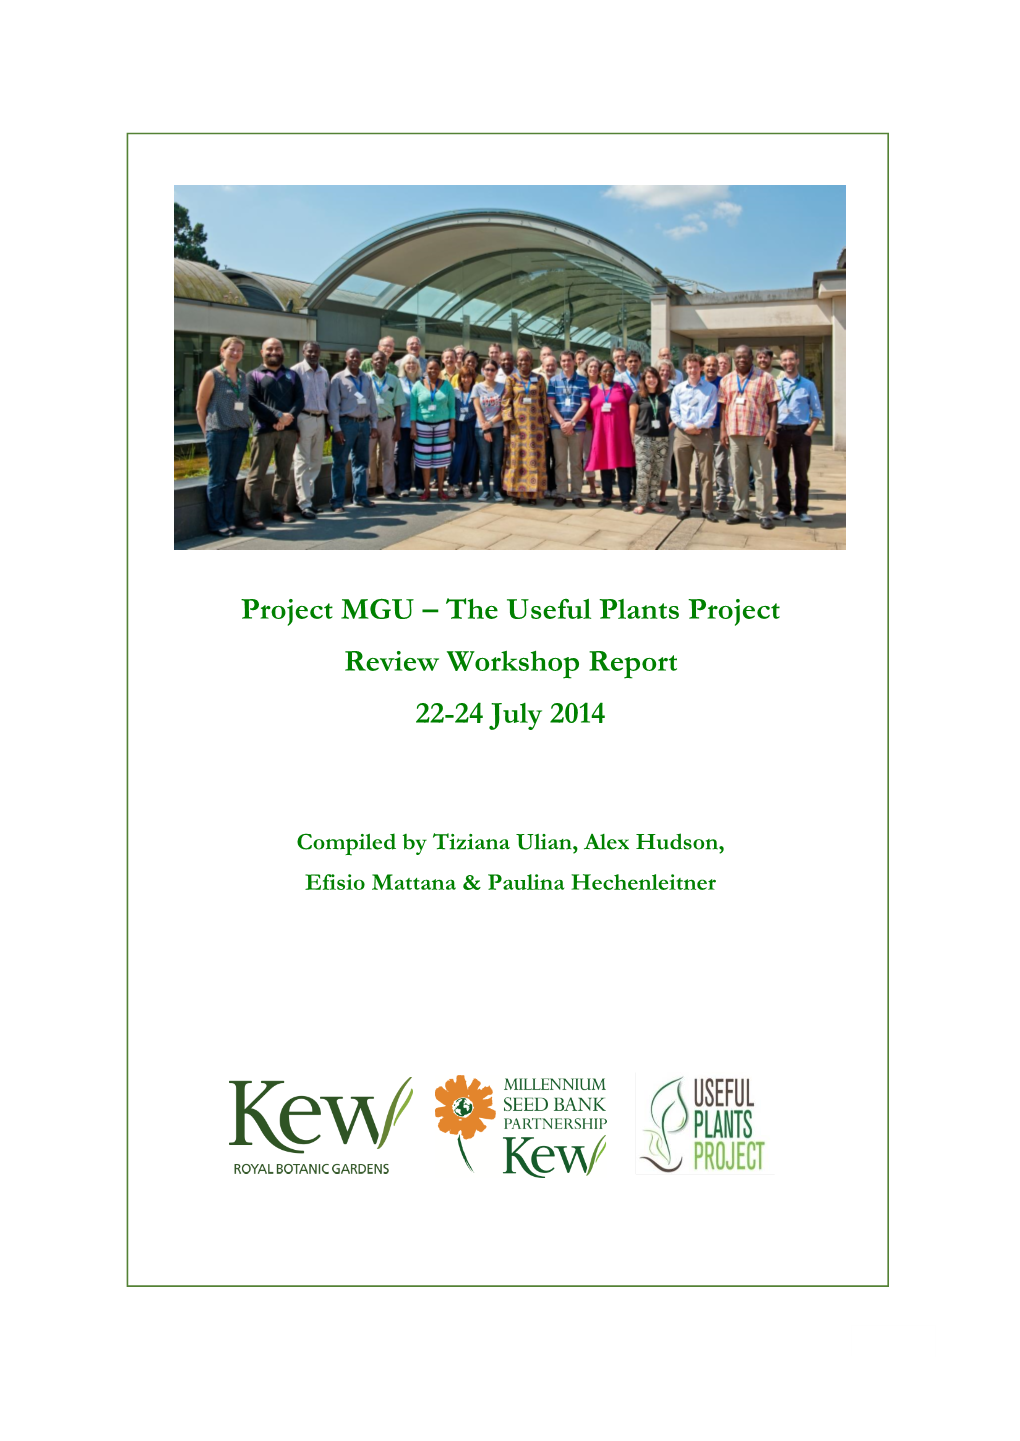 Project MGU – the Useful Plants Project Review Workshop Report 22-24 July 2014